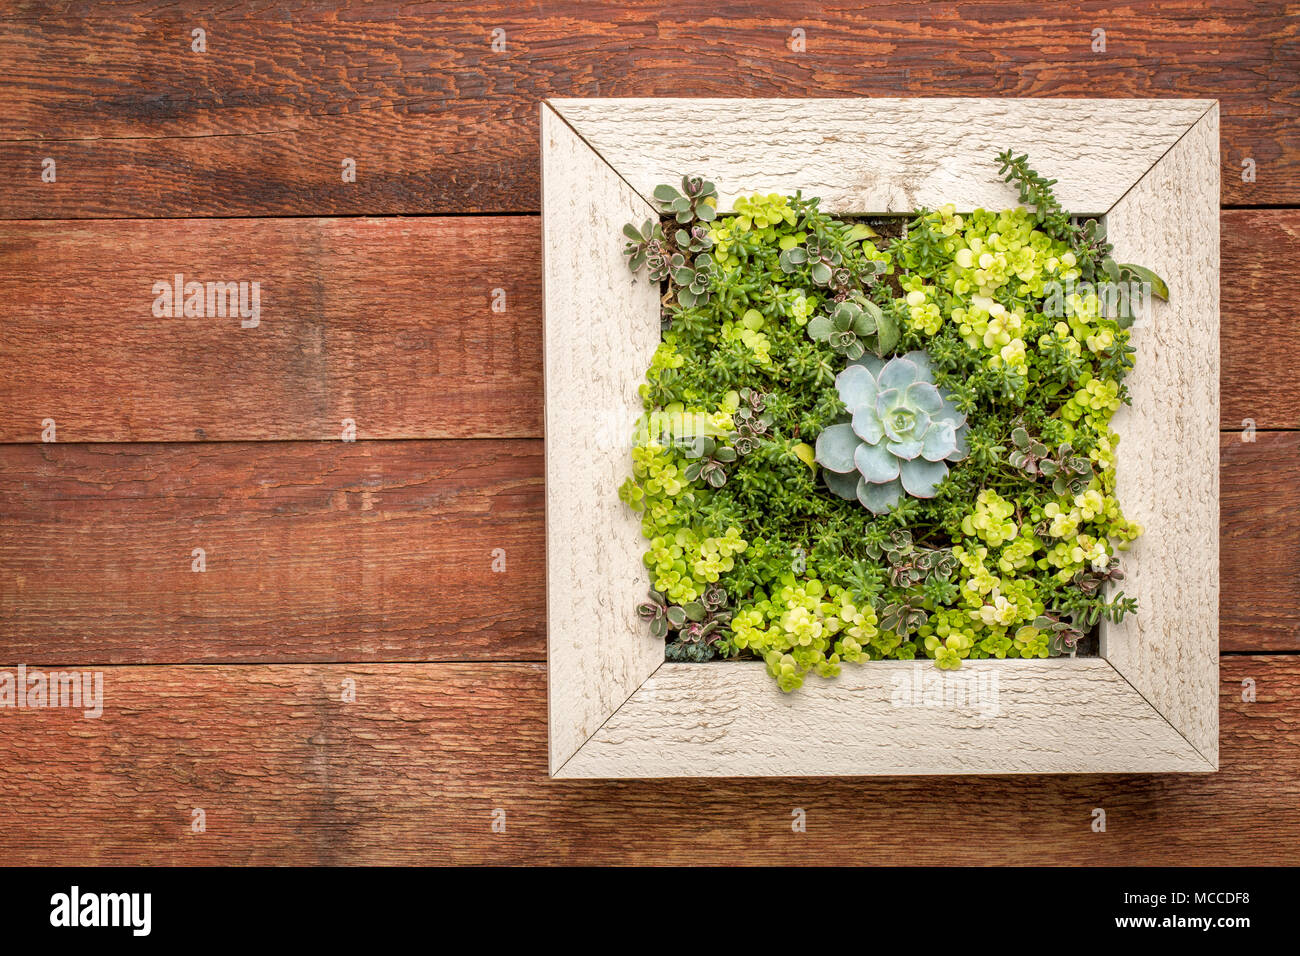 succulent plant mini garden in a picture frame (wall planter) against rustic barn wood Stock Photo